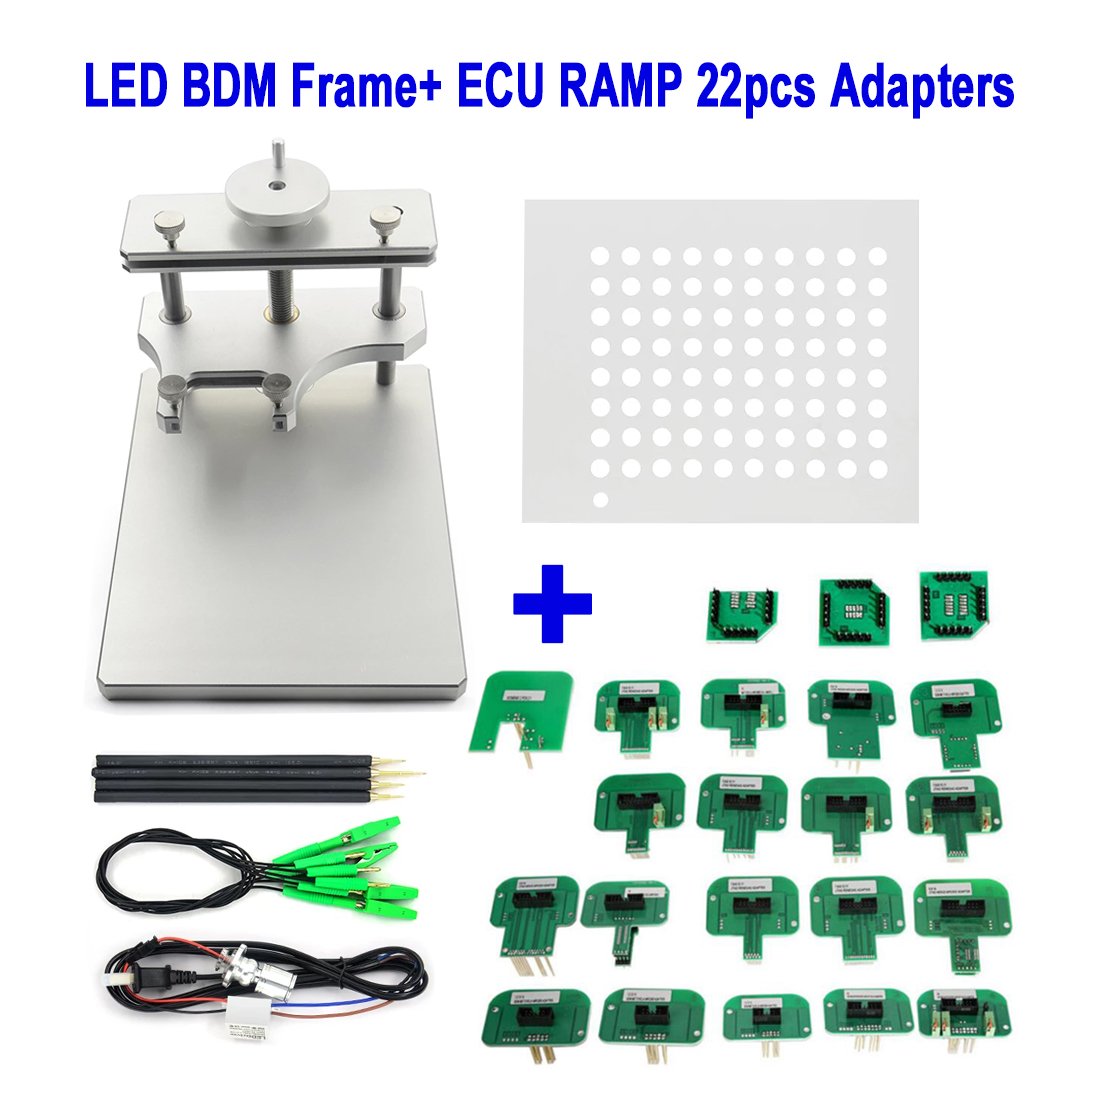 LED BDM Frame Stainless Steel with ECU RAMP 22pcs Adapters Full Set for KTAG KESS KTM